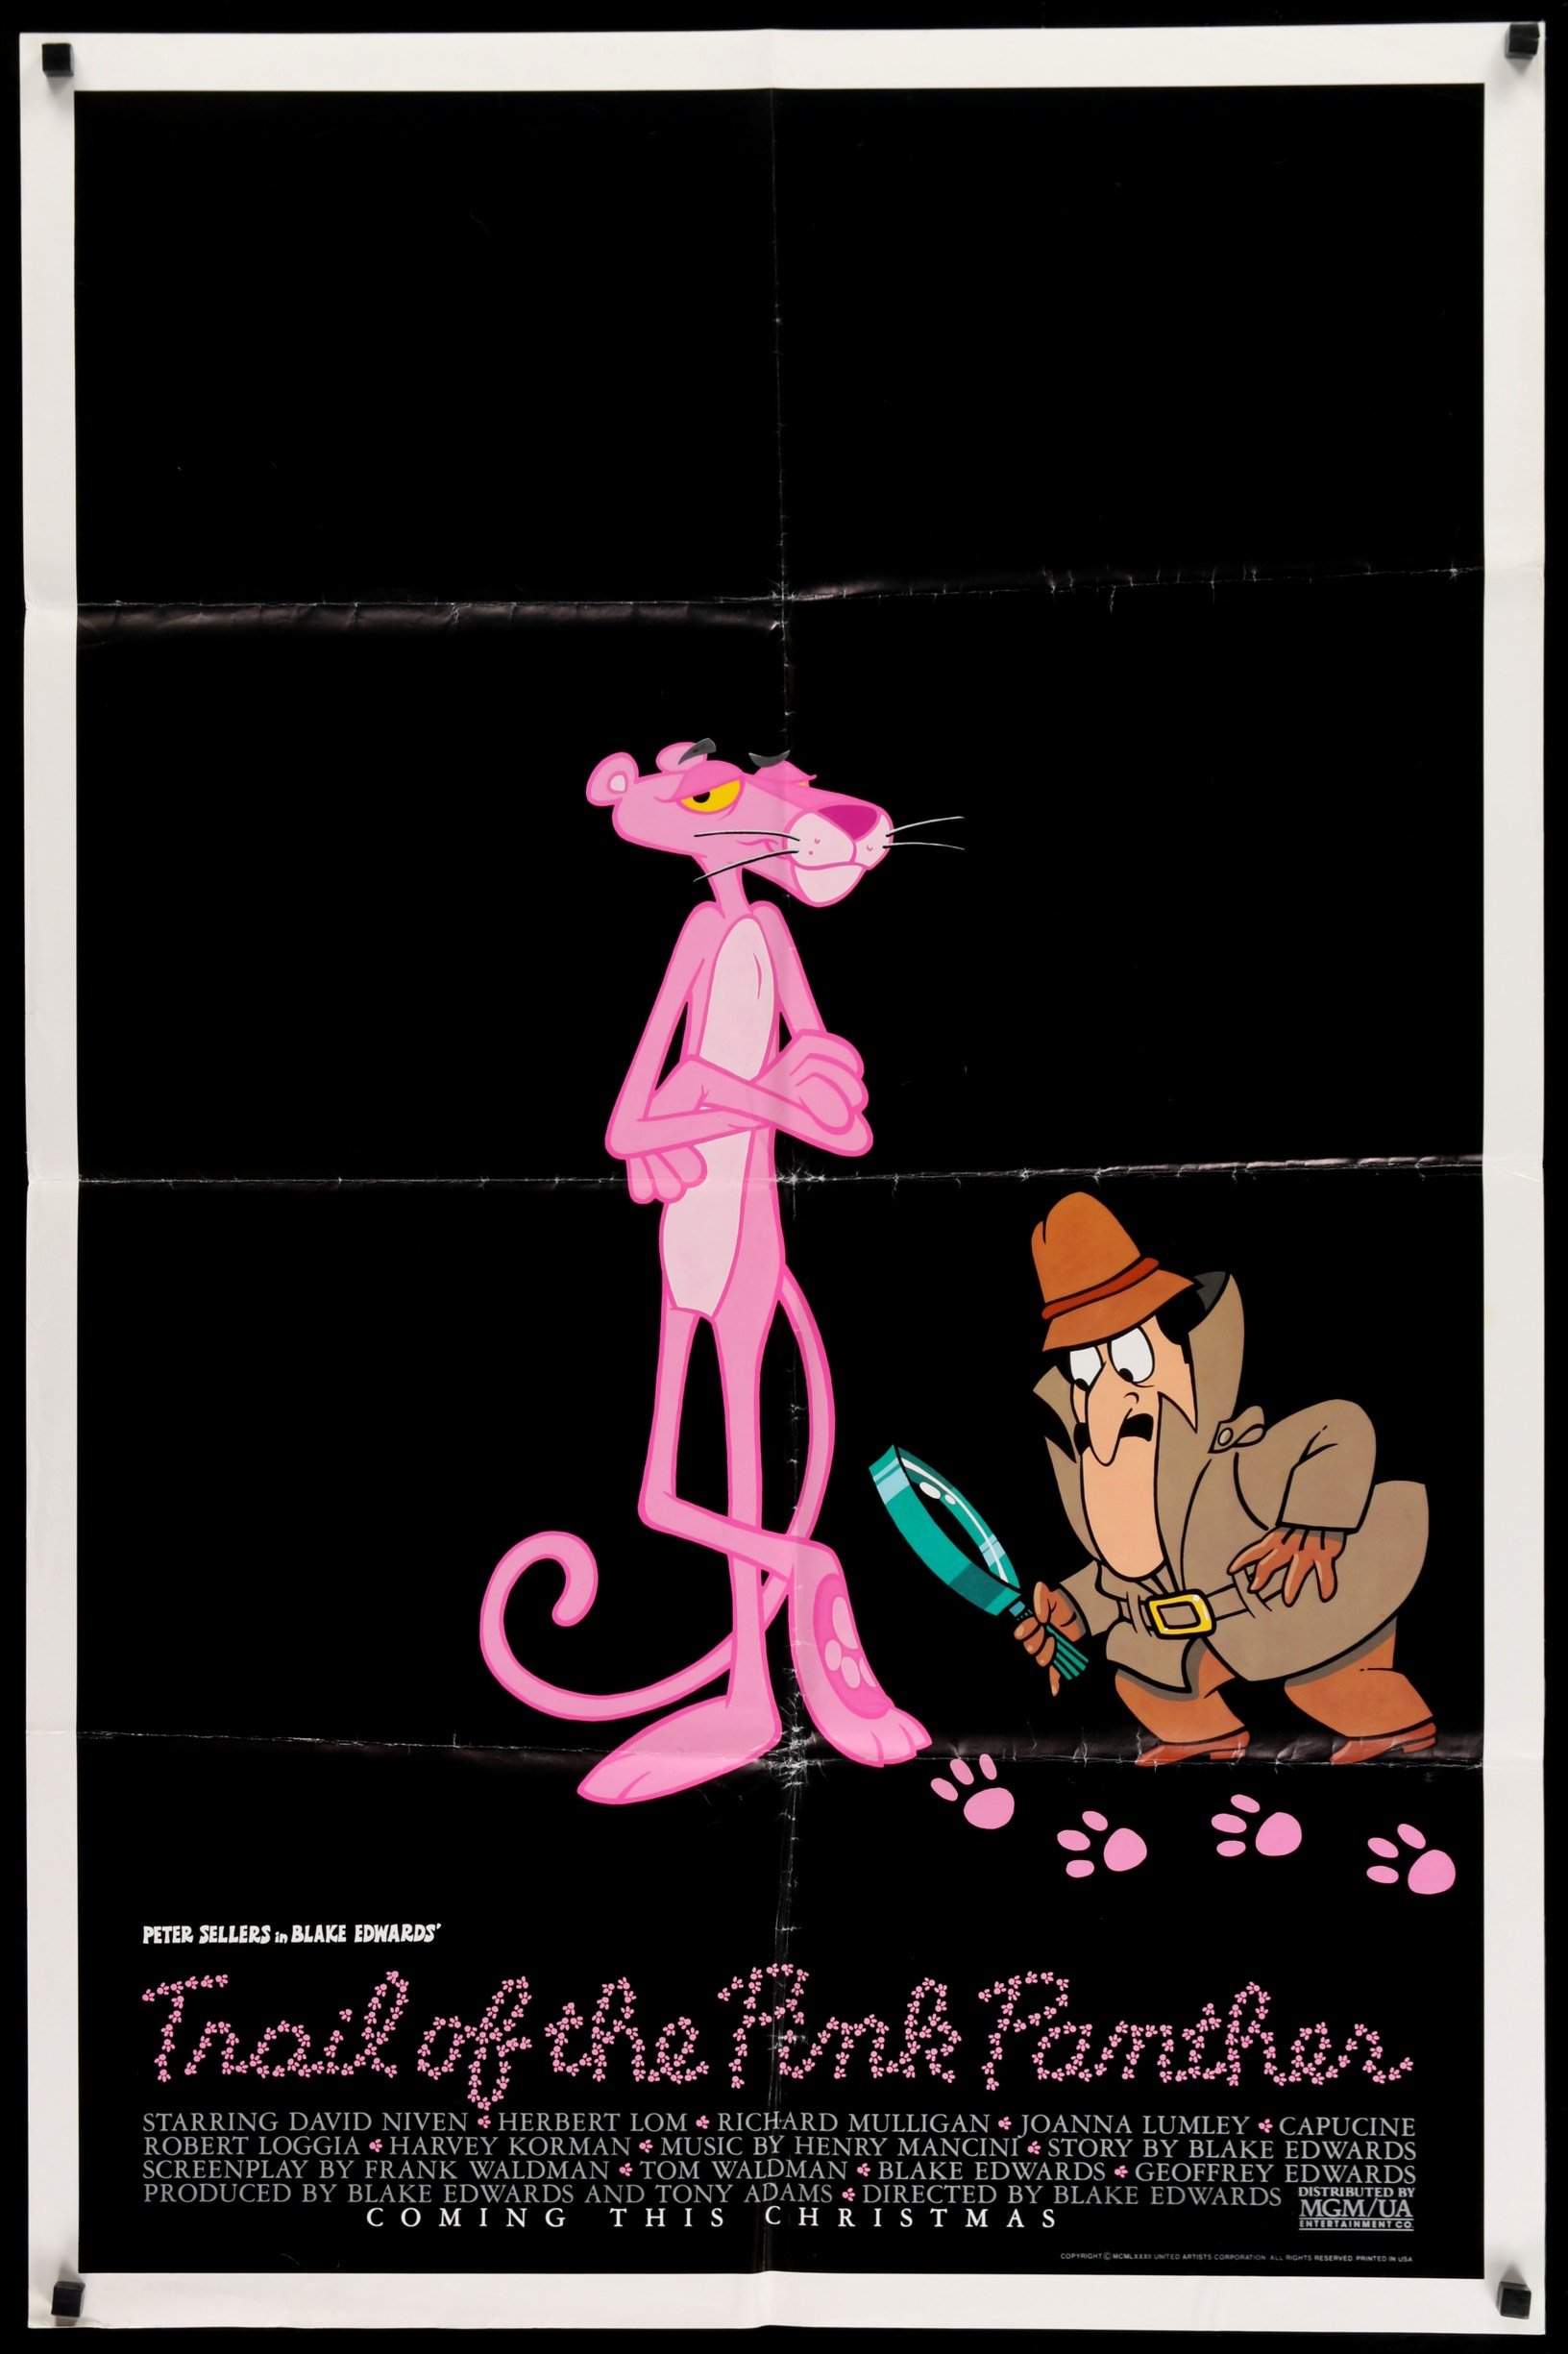 pink panther movie poster